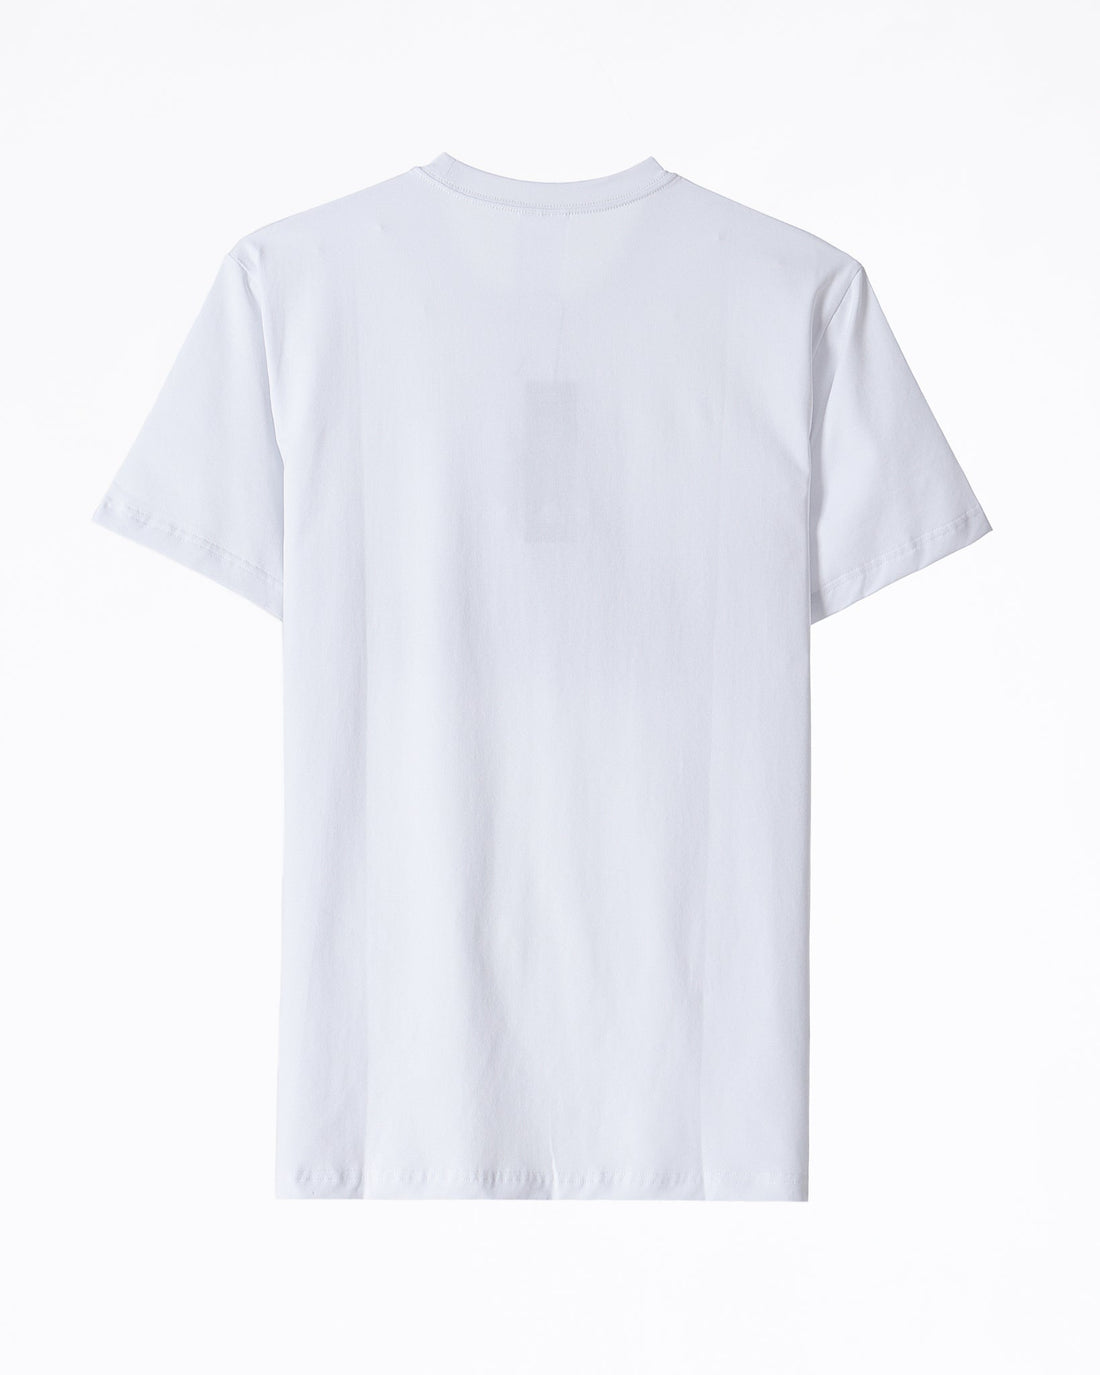 MOI OUTFIT-AD Emboss Men White T-Shirt 16.90